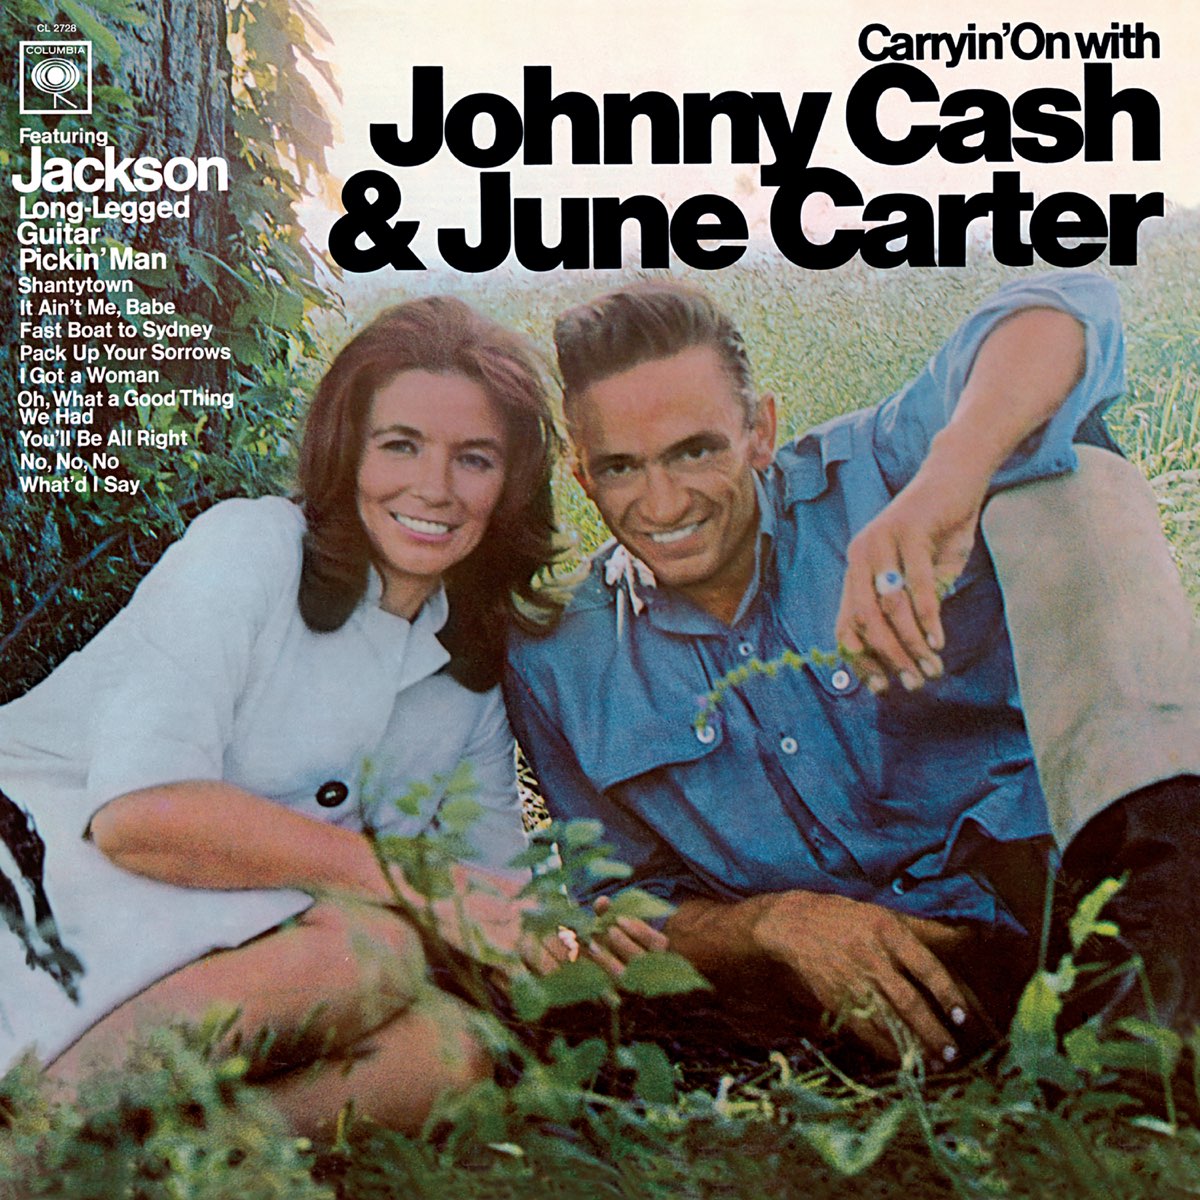 Carryin On With Johnny Cash June Carter Album By Johnny Cash